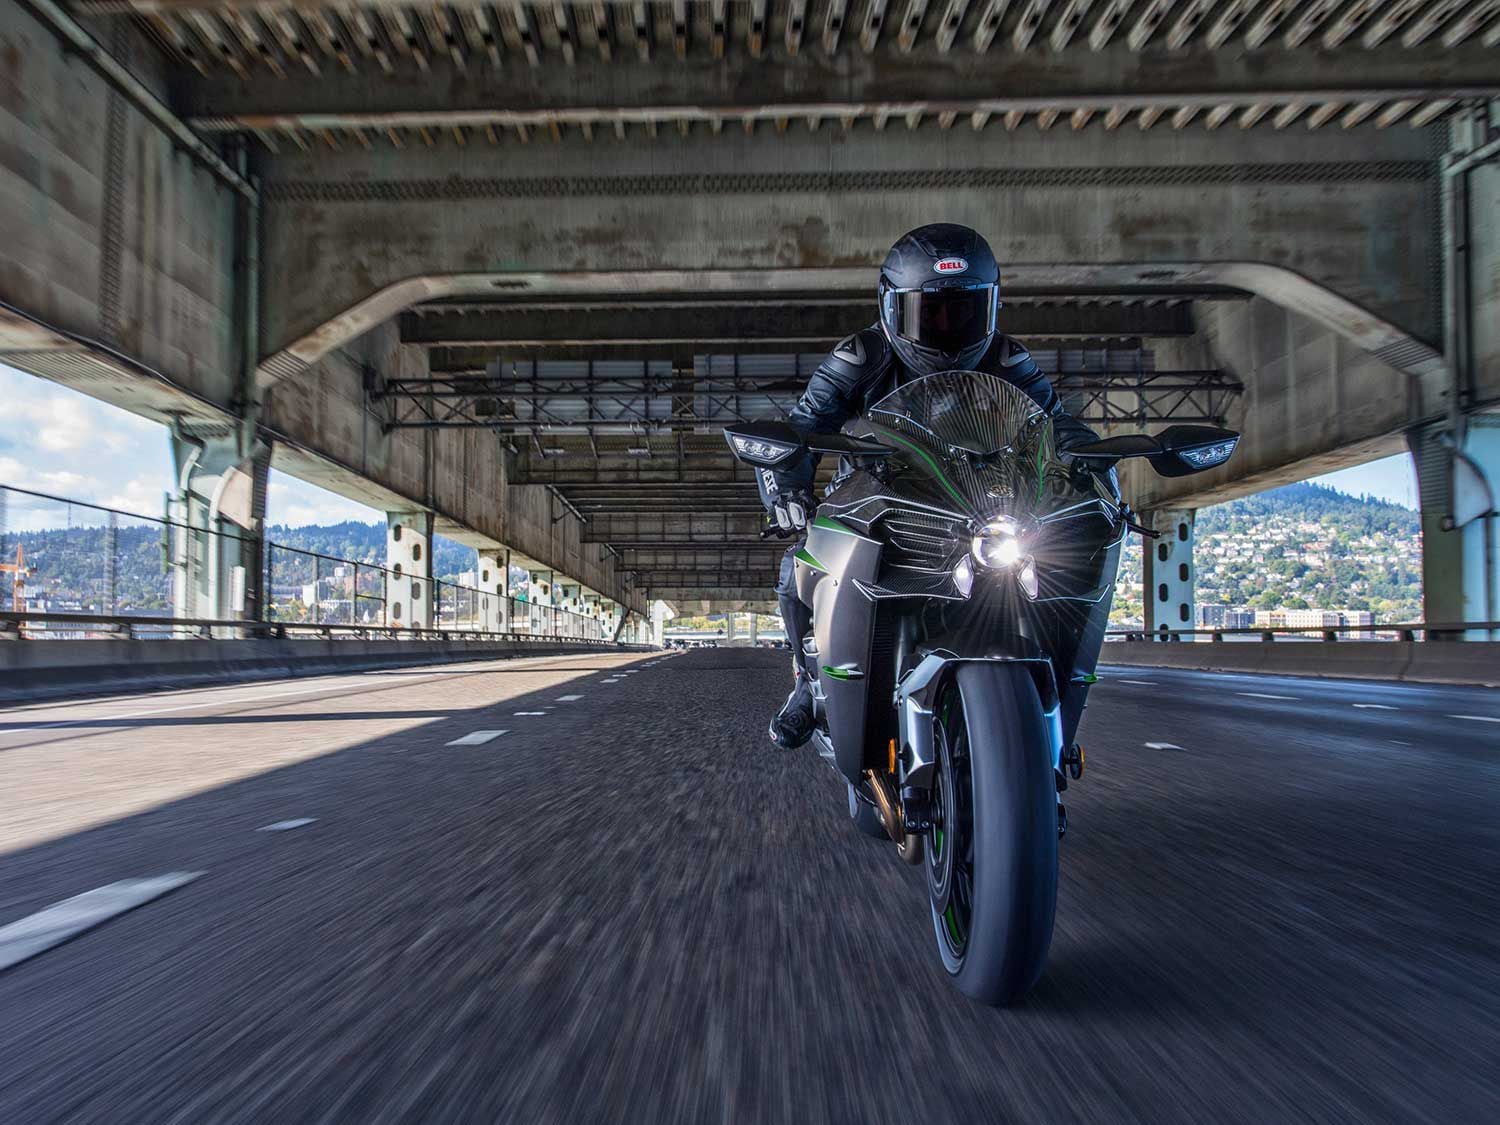 Kawasaki’s Ninja H2 is built for riders looking to quench their need for speed.